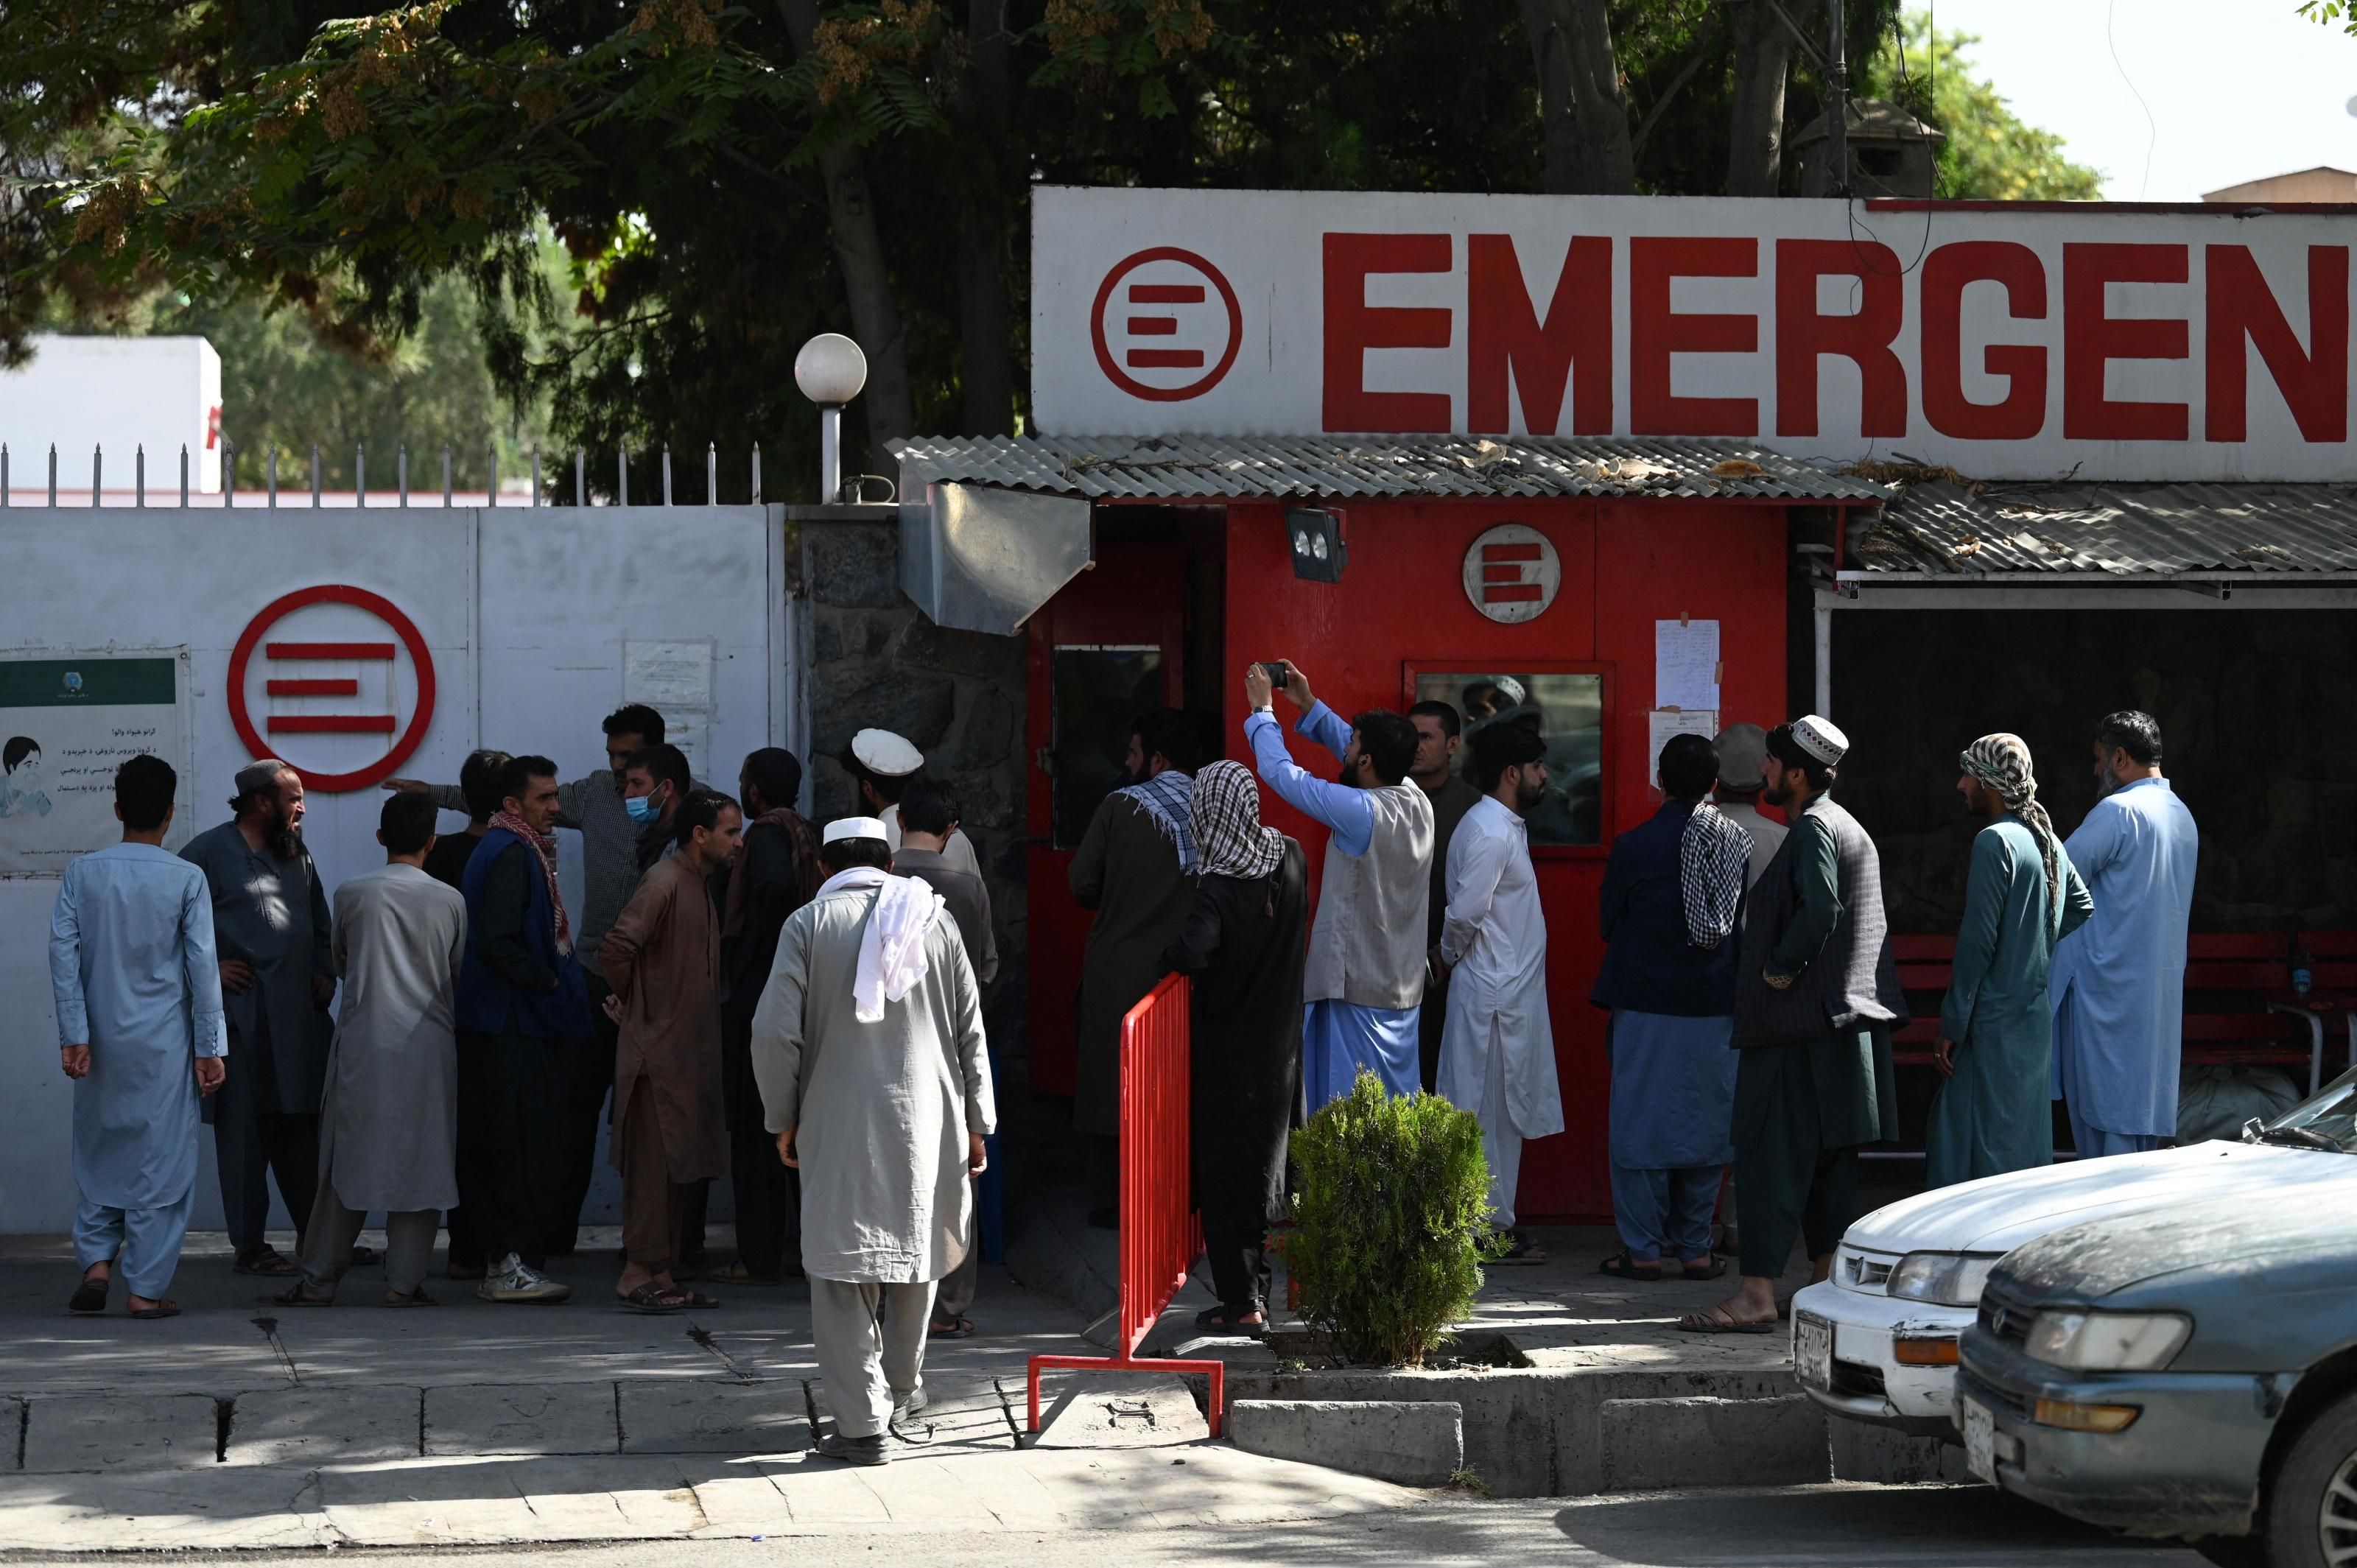 People gather to check on missing relatives a day after a deadly attack outside Kabul's international airport, at a hospital run by Italian NGO Emergency, in Kabul, Afghanistan on August 27, 2021. (Photo: Aamir Qureshi/AFP via Getty Images)